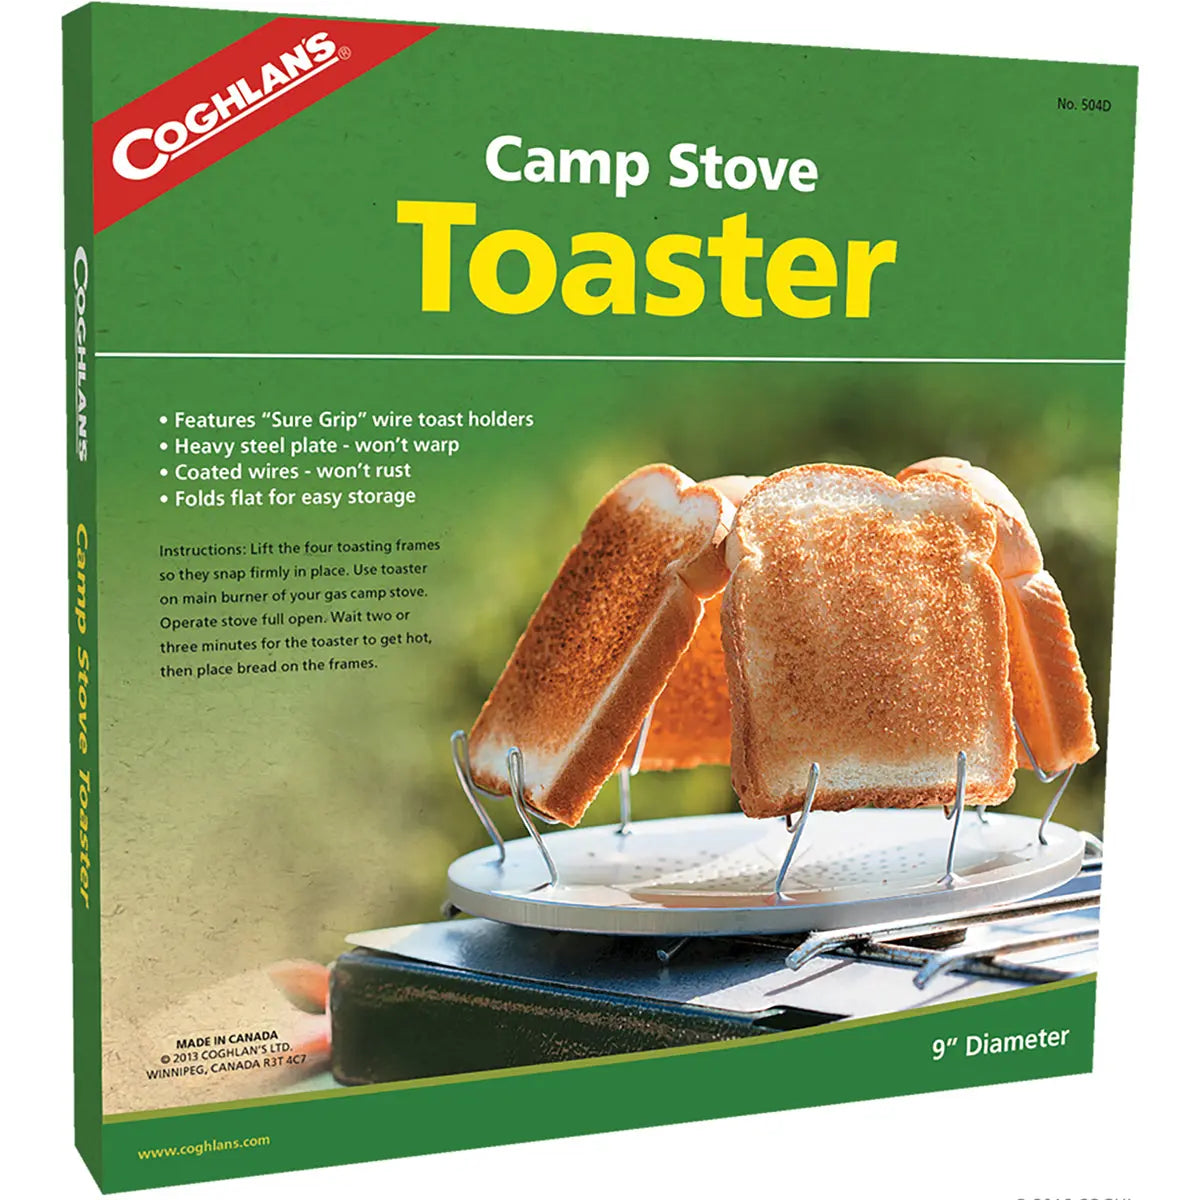 Coghlan's Camp Stove Toaster Steel Wire Toast Holders Compact Camping Cookware Coghlan's